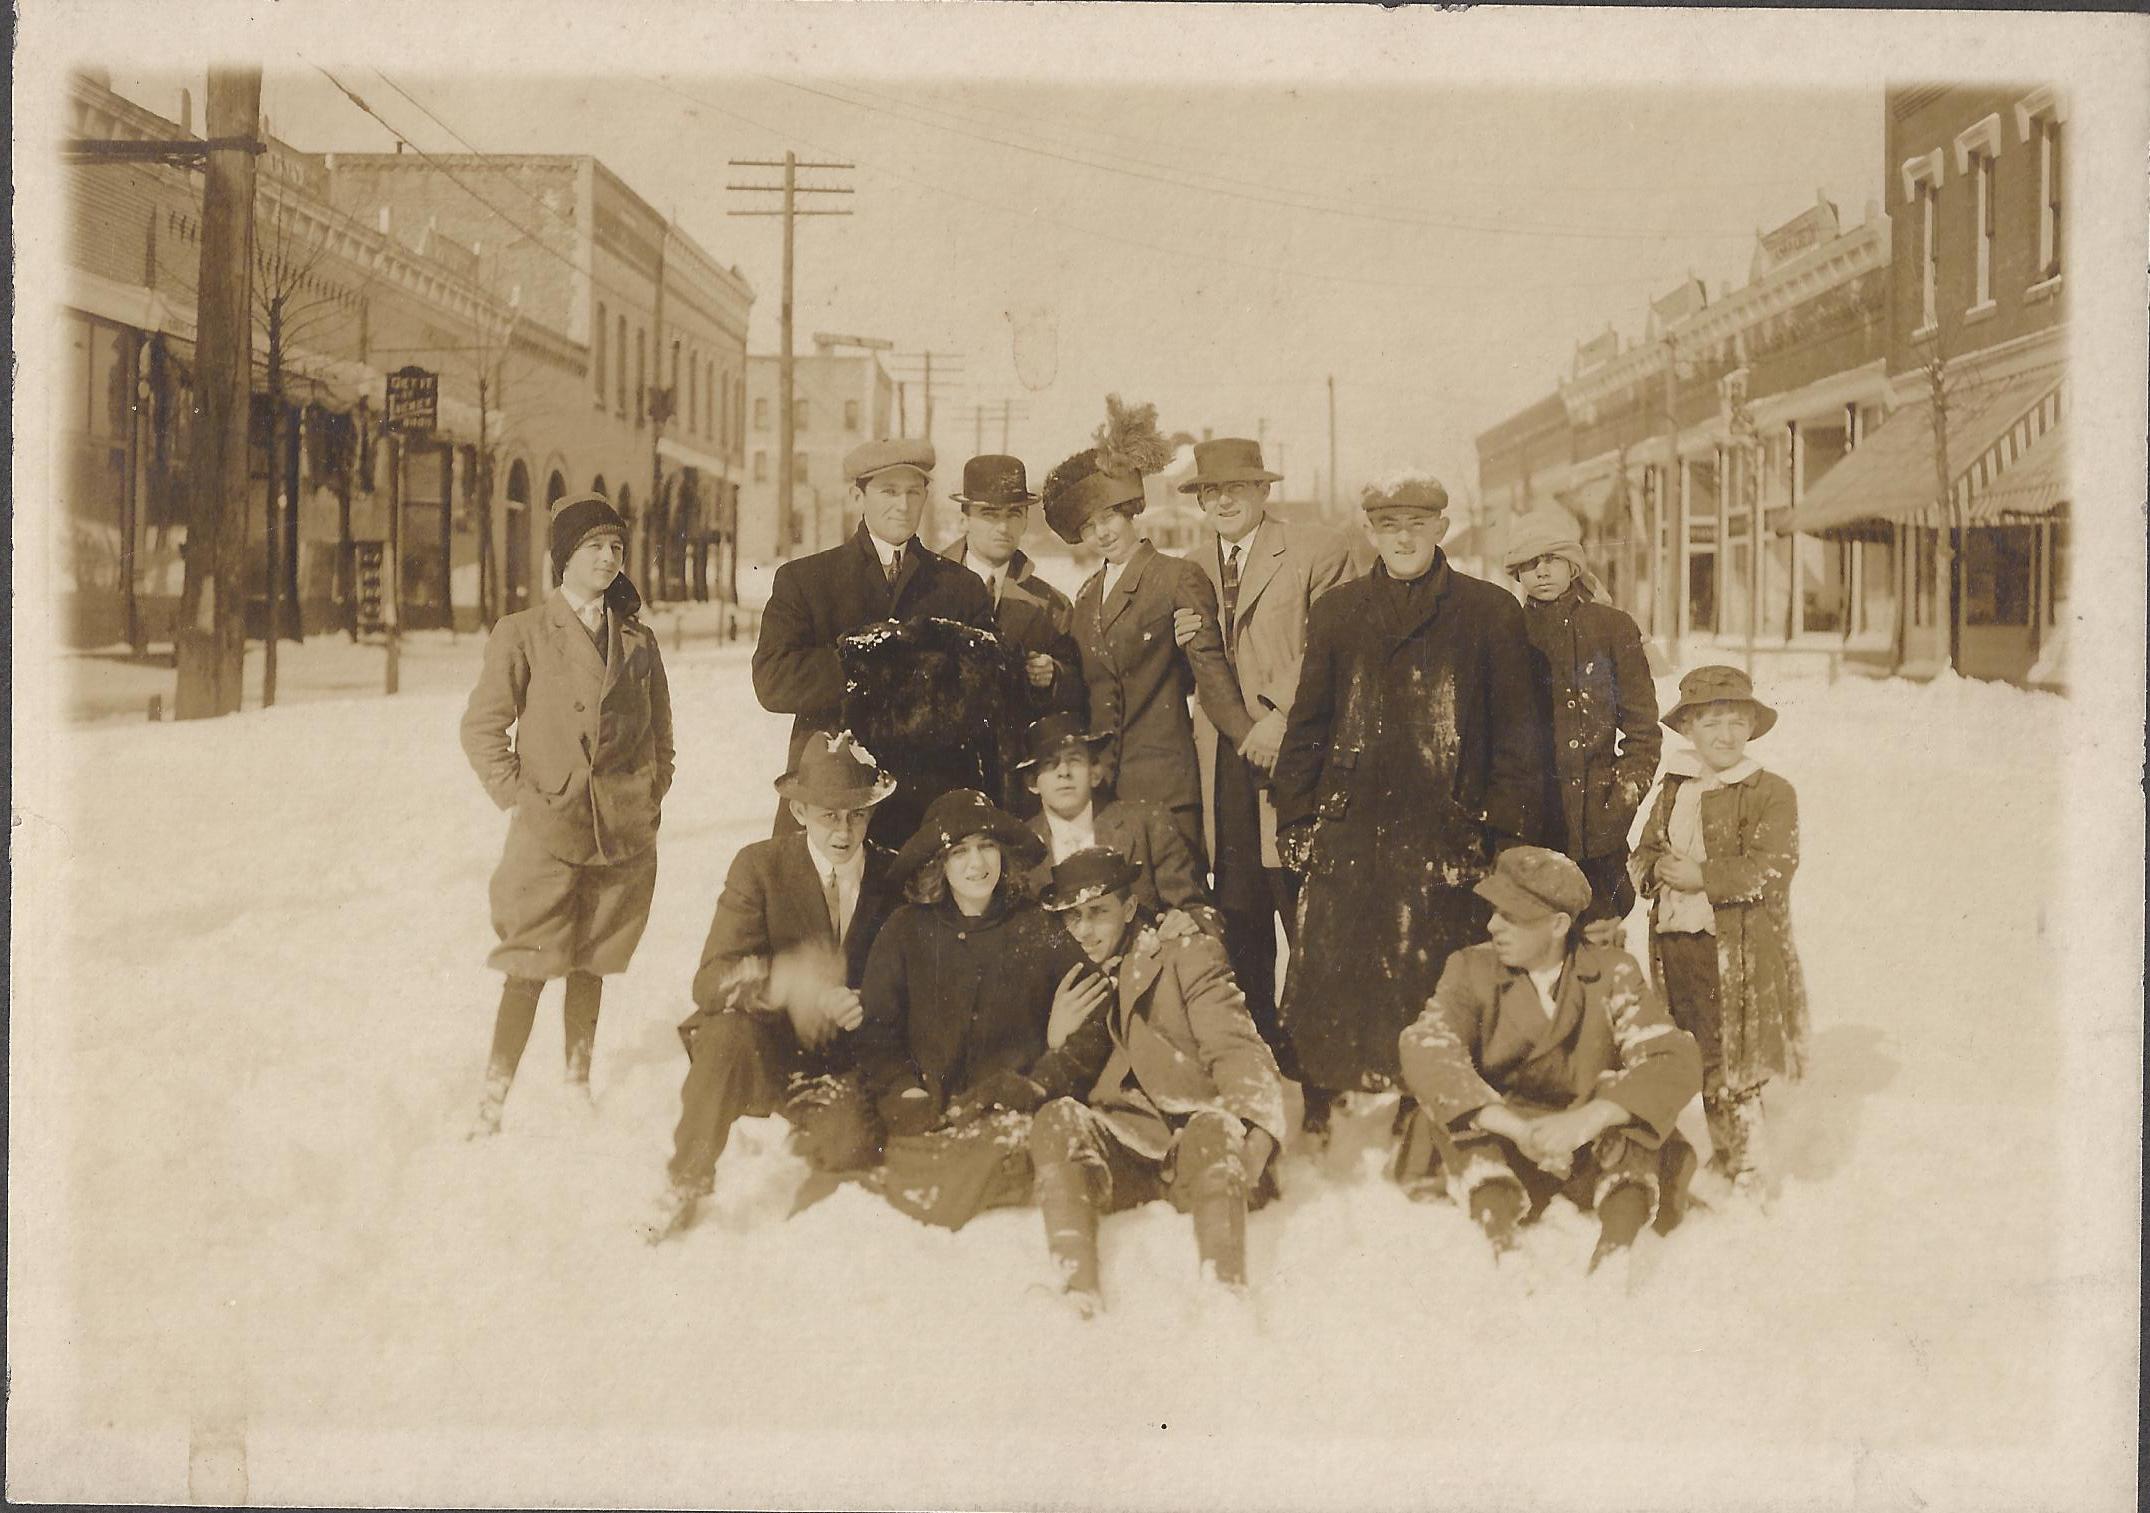 Hamlet Snow Storm Unknown Date but probably 1910-1920.jpg